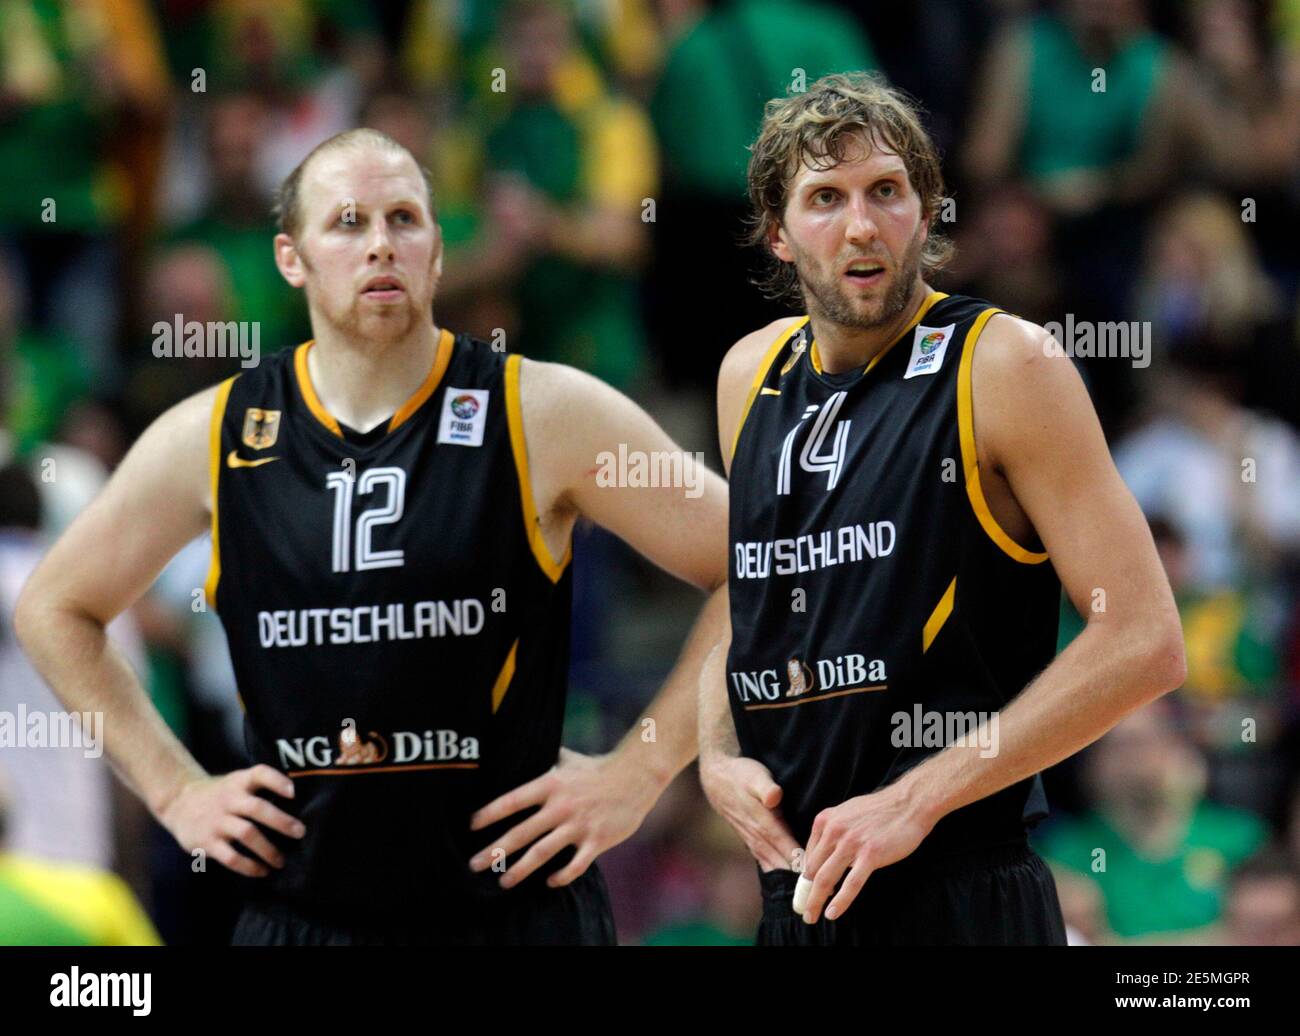 Germany's Dirk Nowitzki (R) and teammate Chris Kaman wait to start the  second half against Lithuania during their FIBA EuroBasket 2011 Group E  basketball game in Vilnius September 11, 2011. REUTERS/Ints Kalnins (